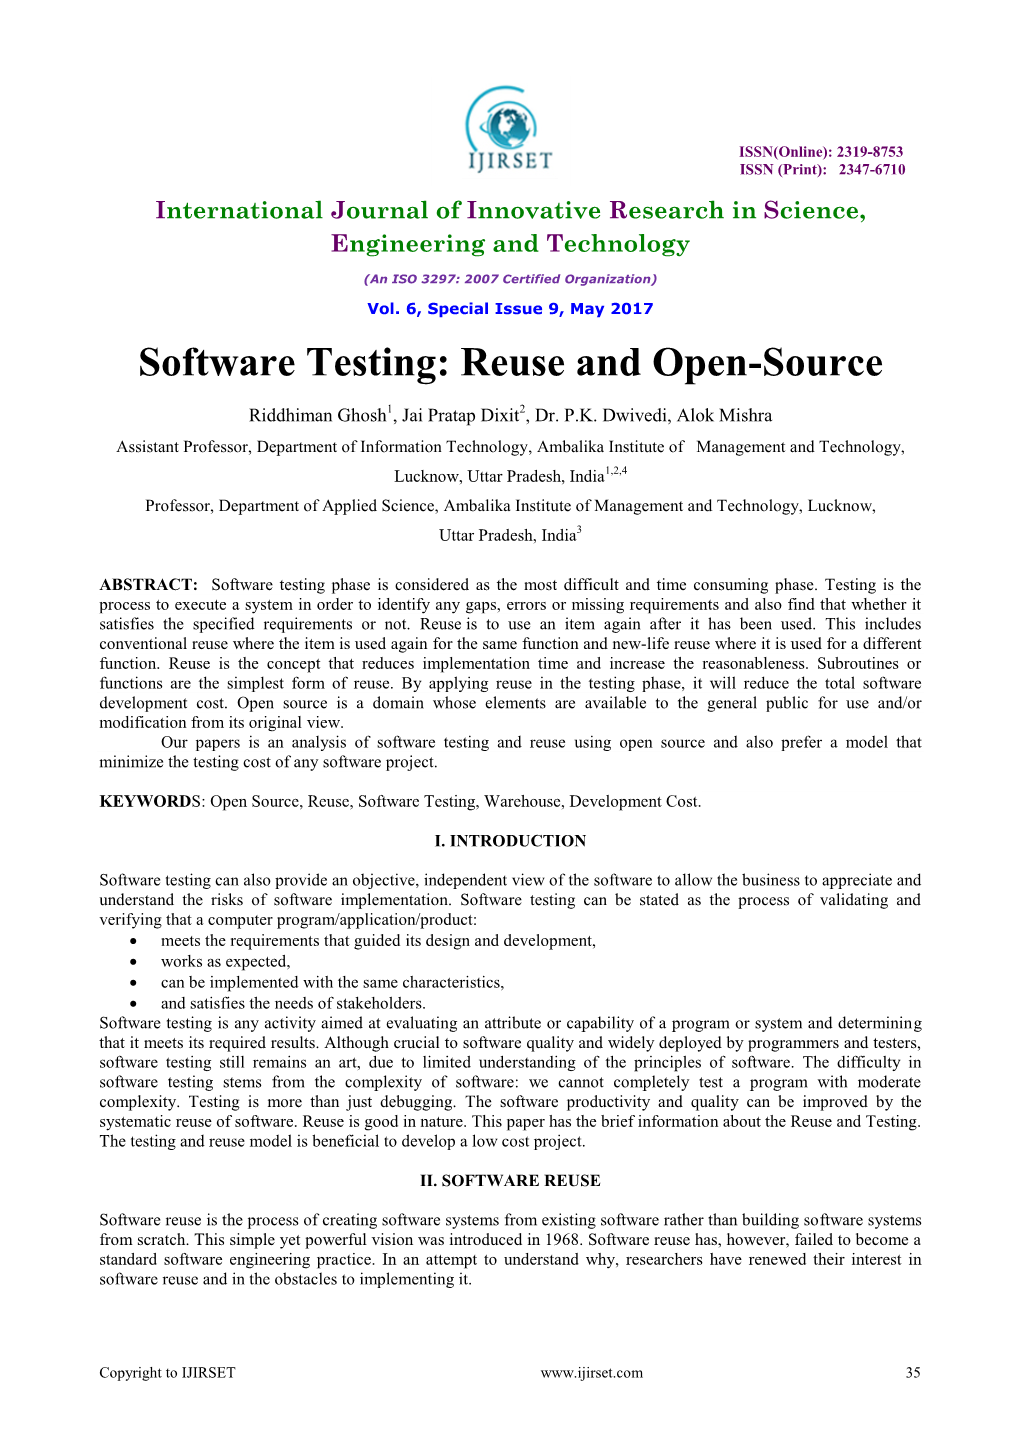 Software Testing: Reuse and Open-Source